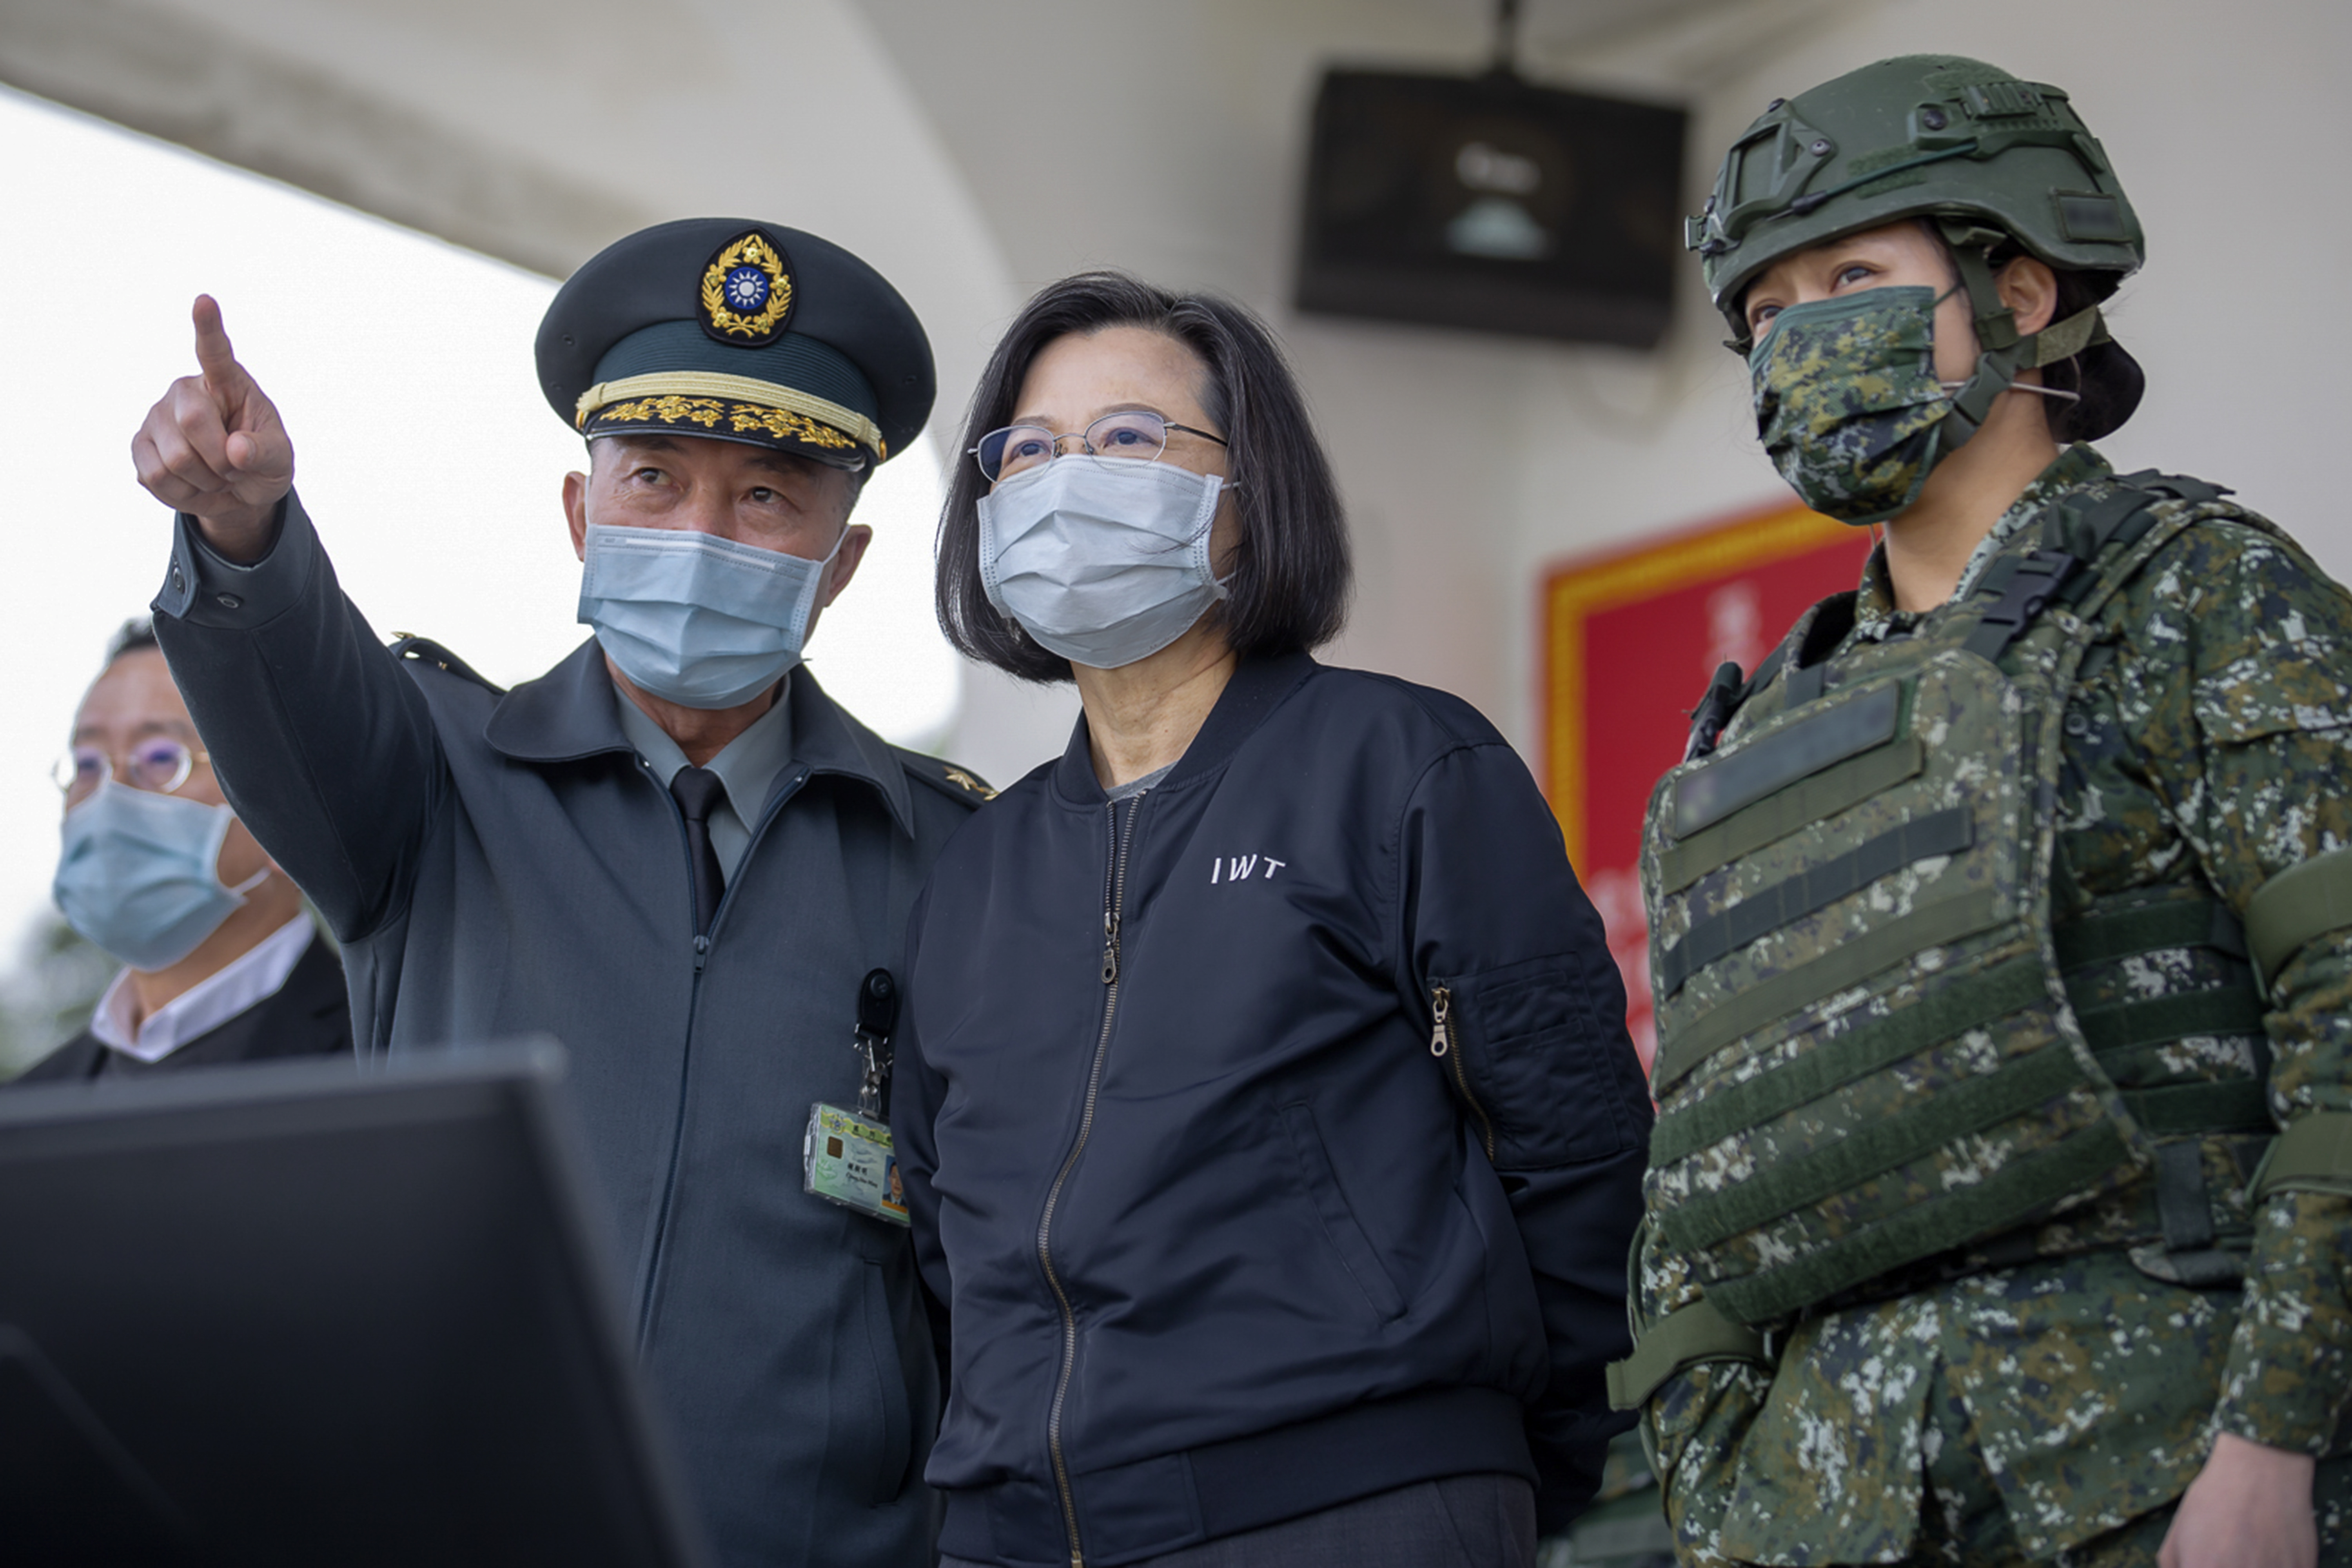 This handout photo released by the Taiwan Presidency shows Taiwan President Tsai Ing-wen, accompanied by military commanders, as she witnesses war drills at a military base in Chiayi, Taiwan, Friday, Jan. 6, 2023. ( Taiwan Presidency via AP)